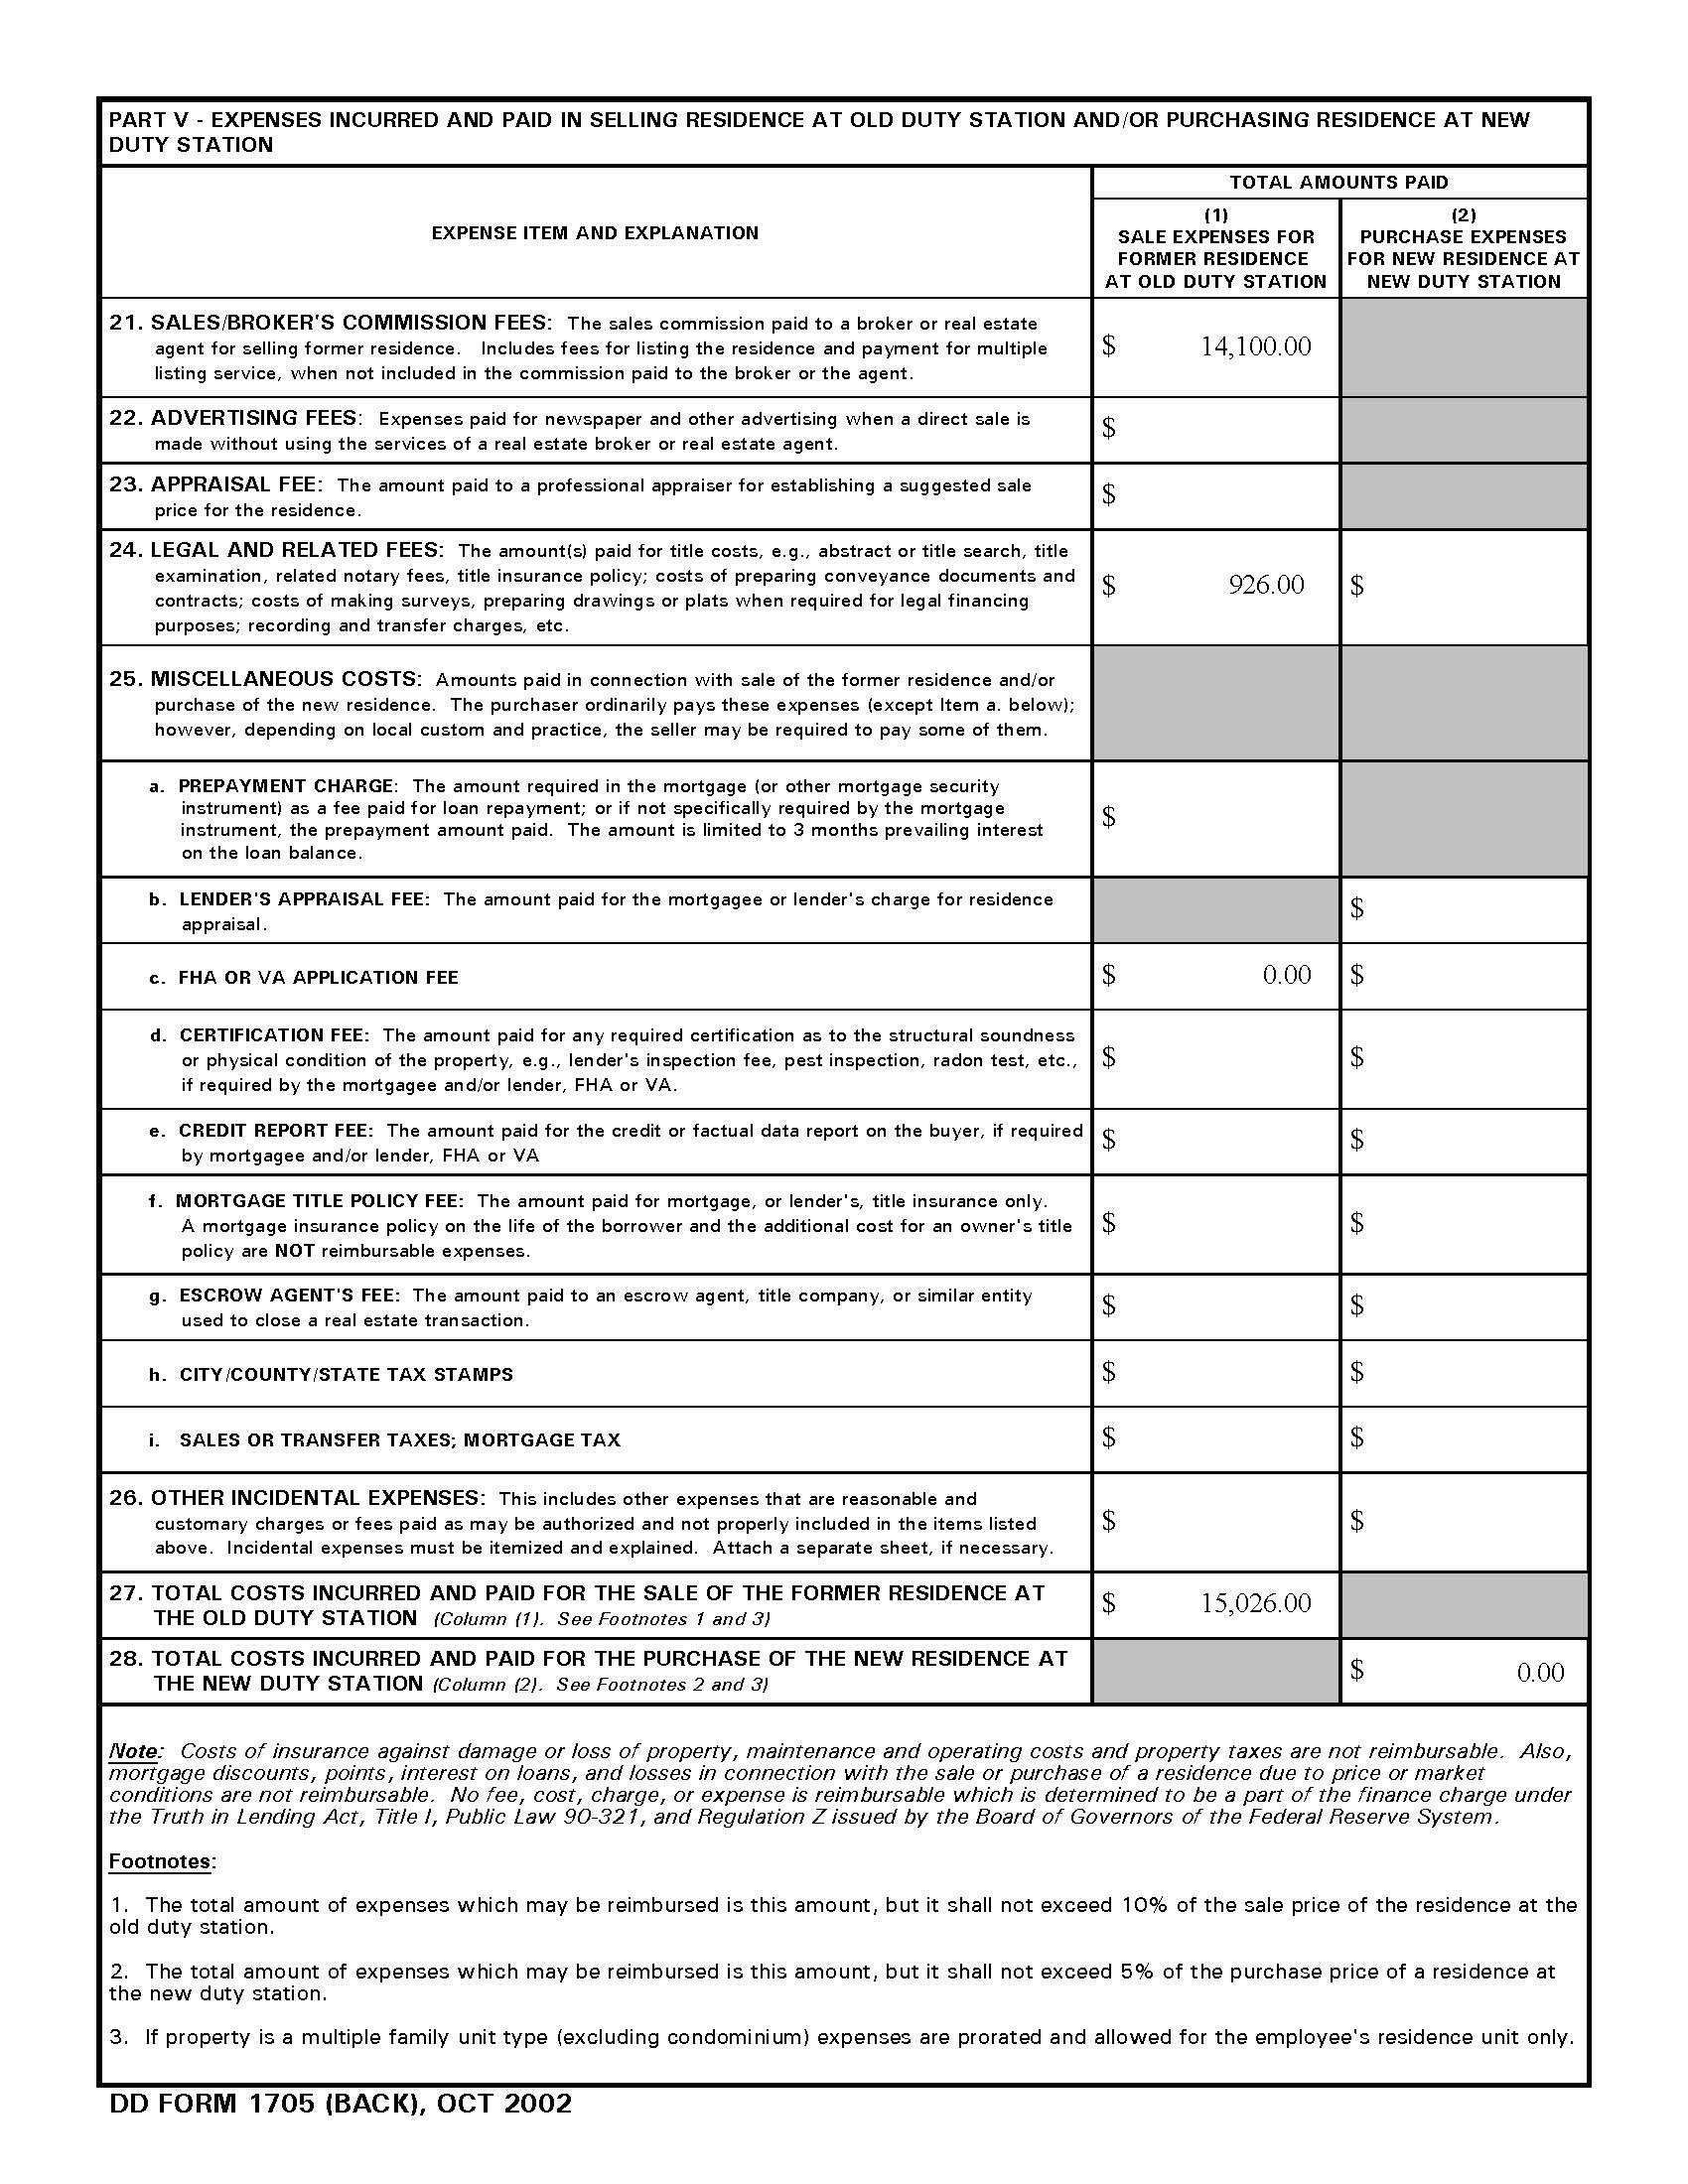 Real Estate Sale/Purchase Form 1705 Page 2 filled out